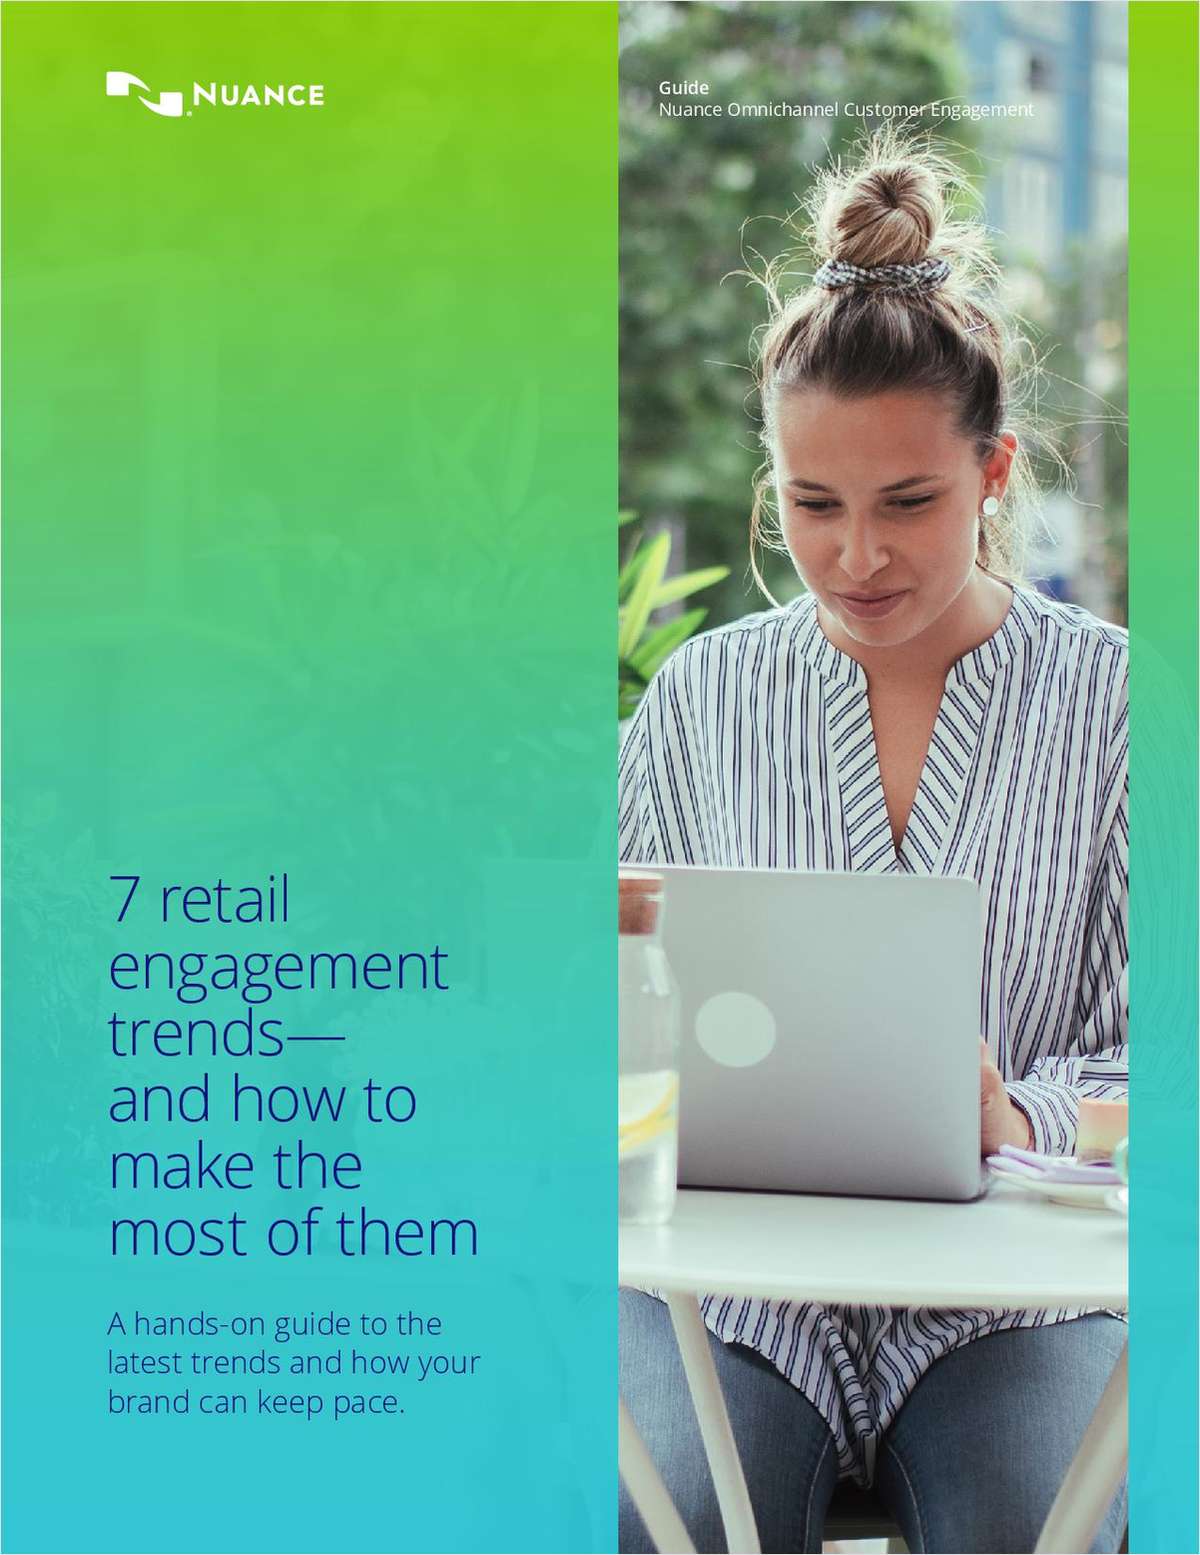 Top Engagement Trends for Retail